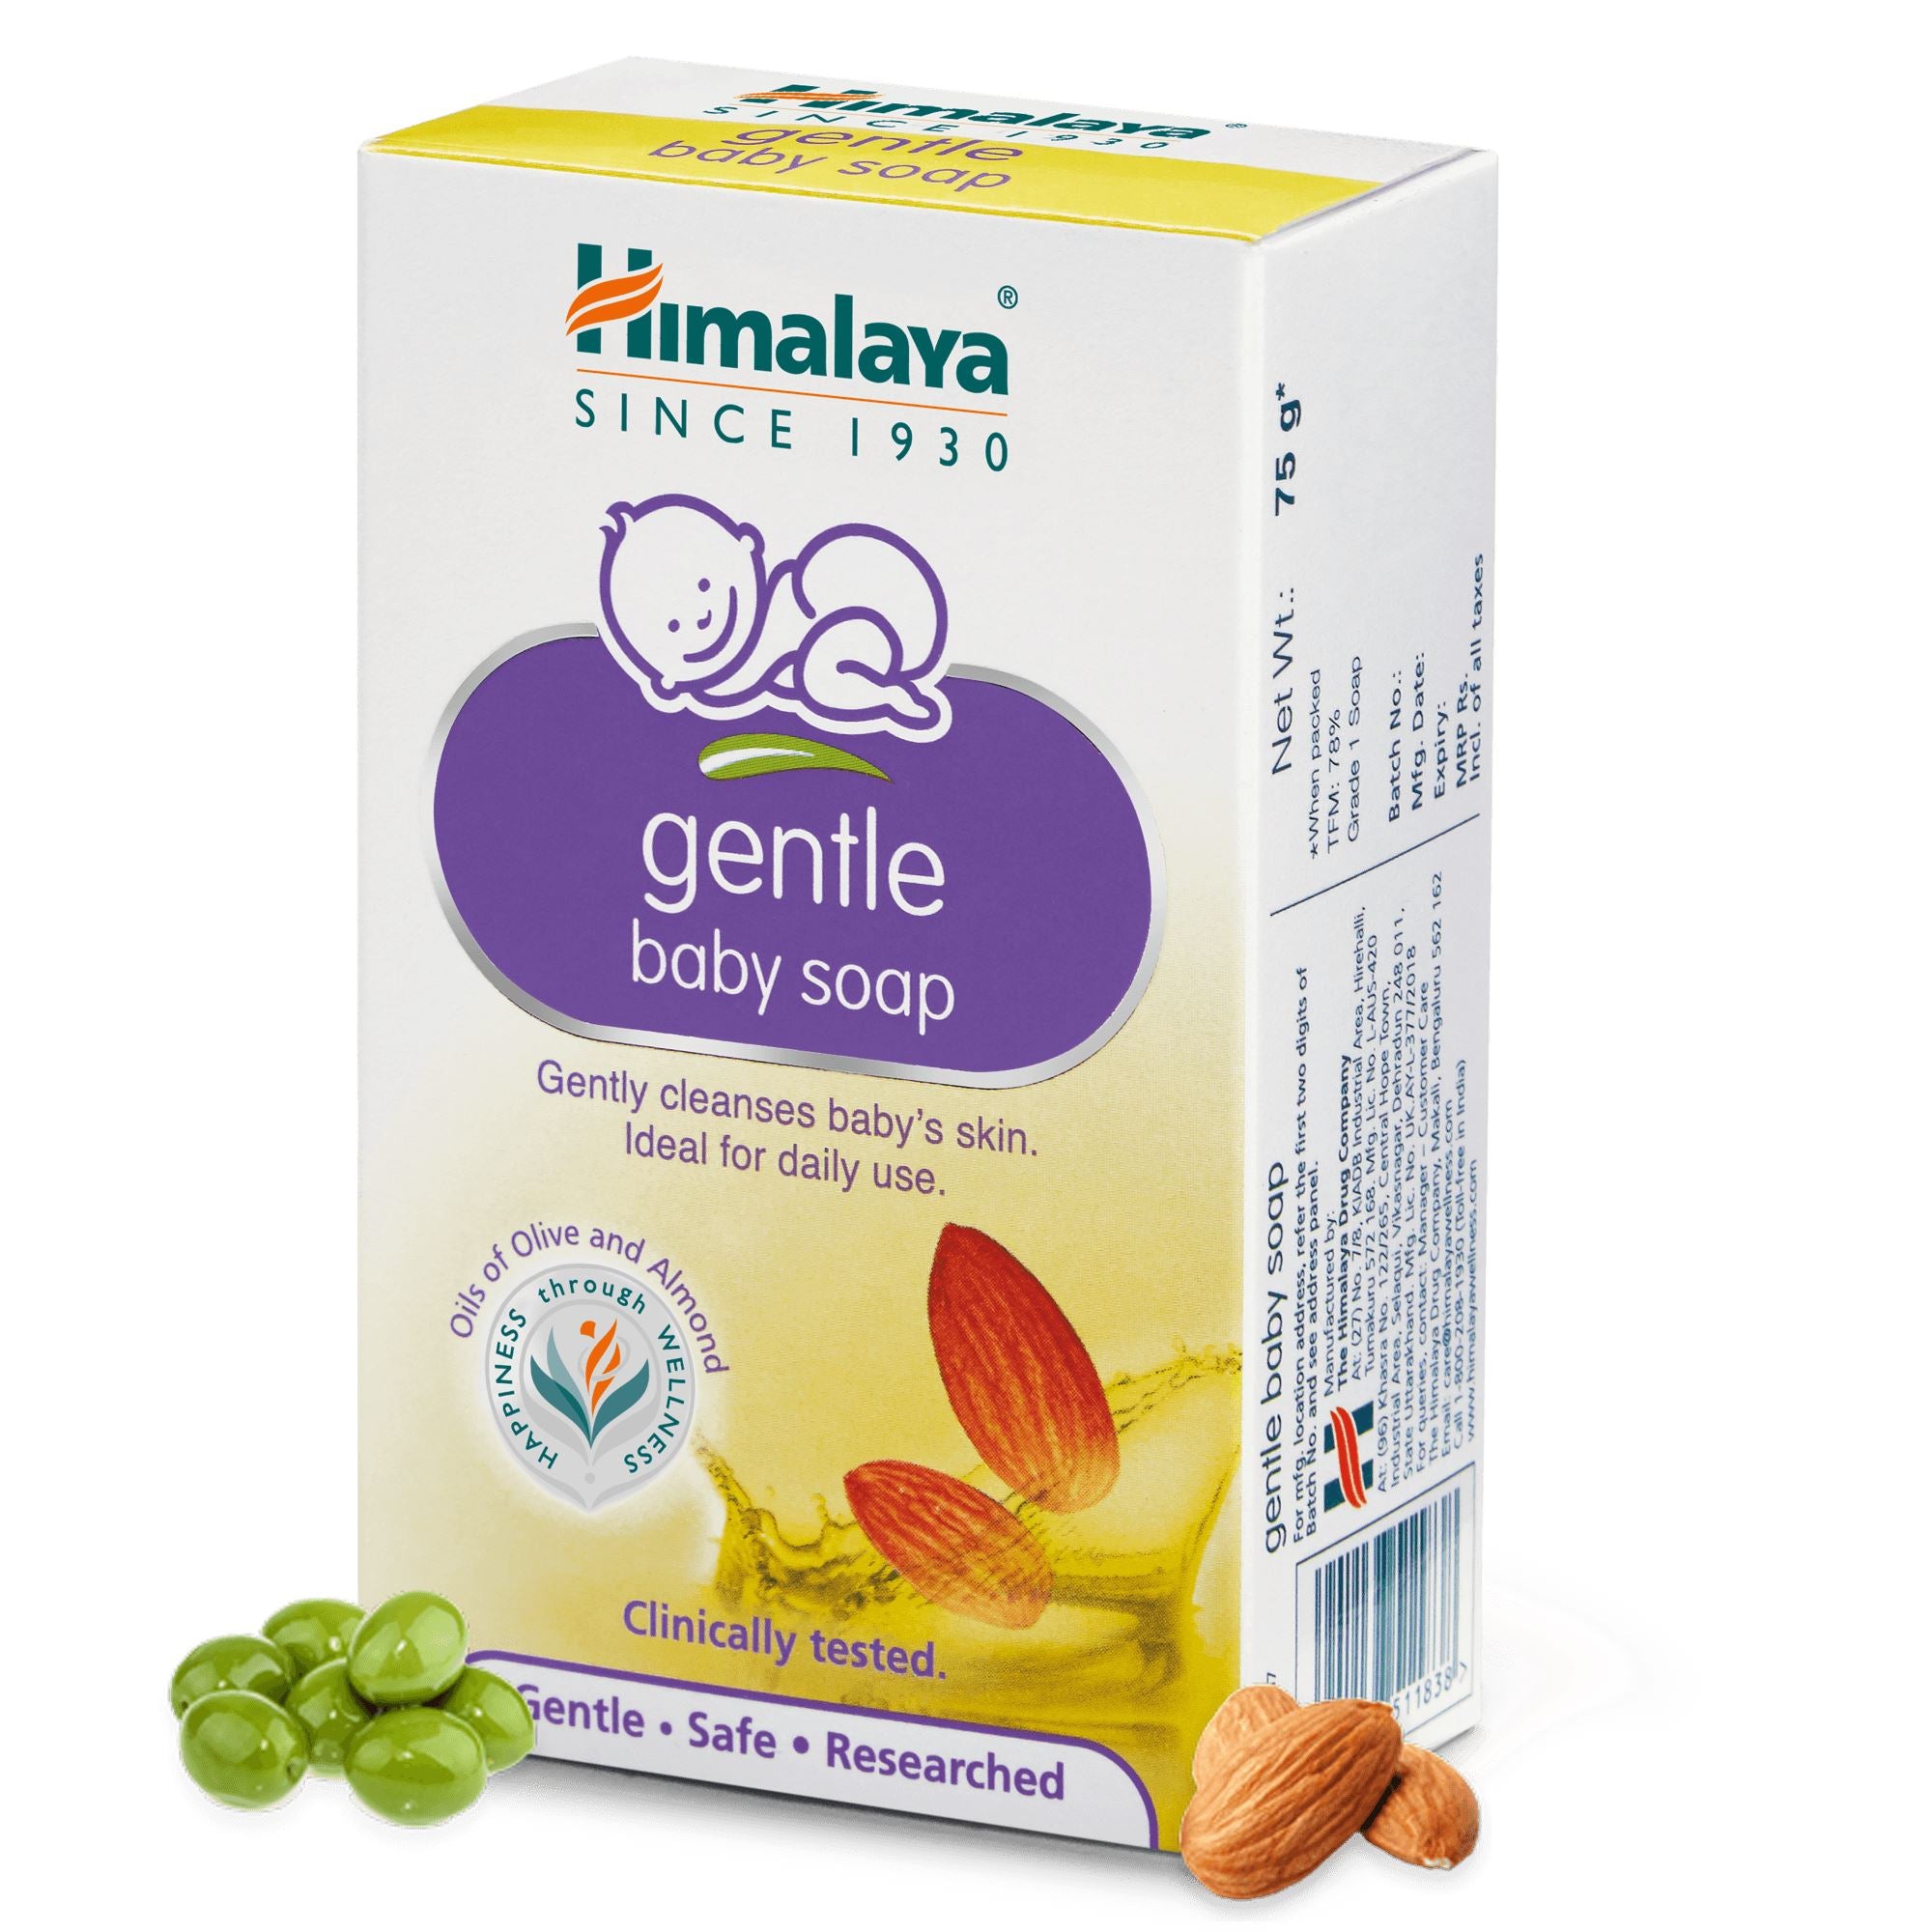 Himalaya Gentle Baby Soap 75g- Gently cleanses baby’s skin